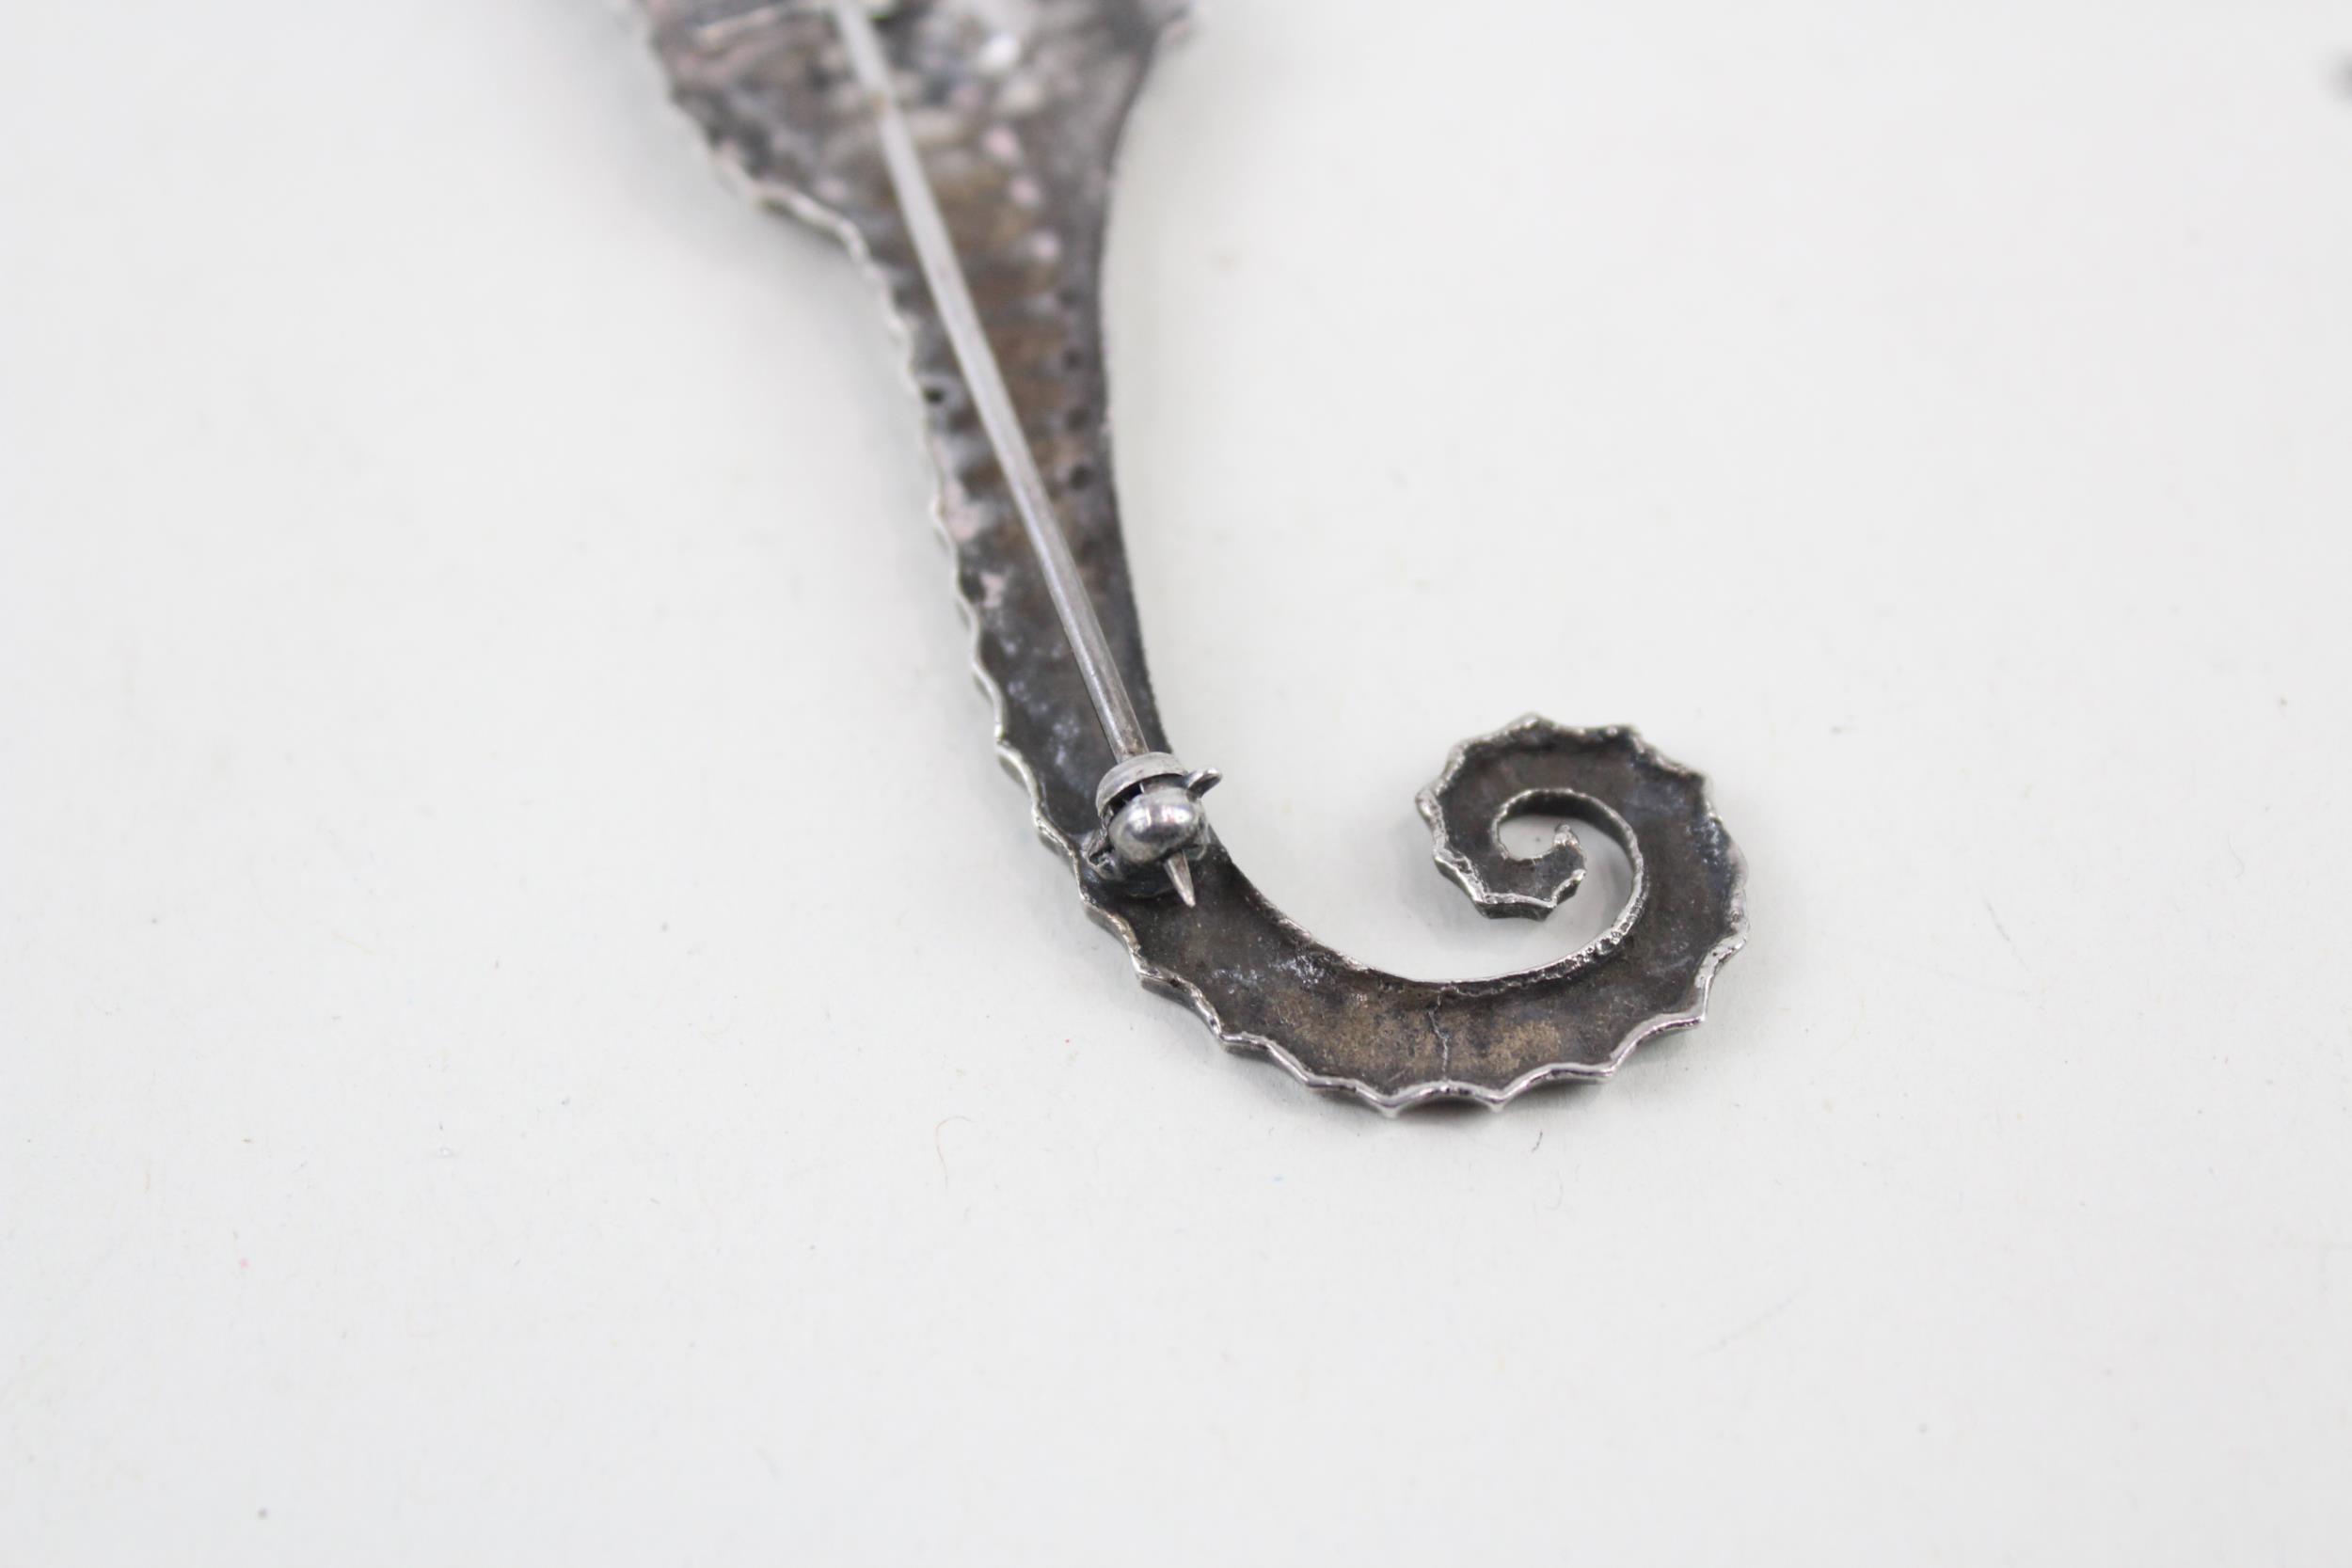 Silver seahorse brooch stamped Black, Starr & Gorham by Cini (15g) - Image 6 of 7